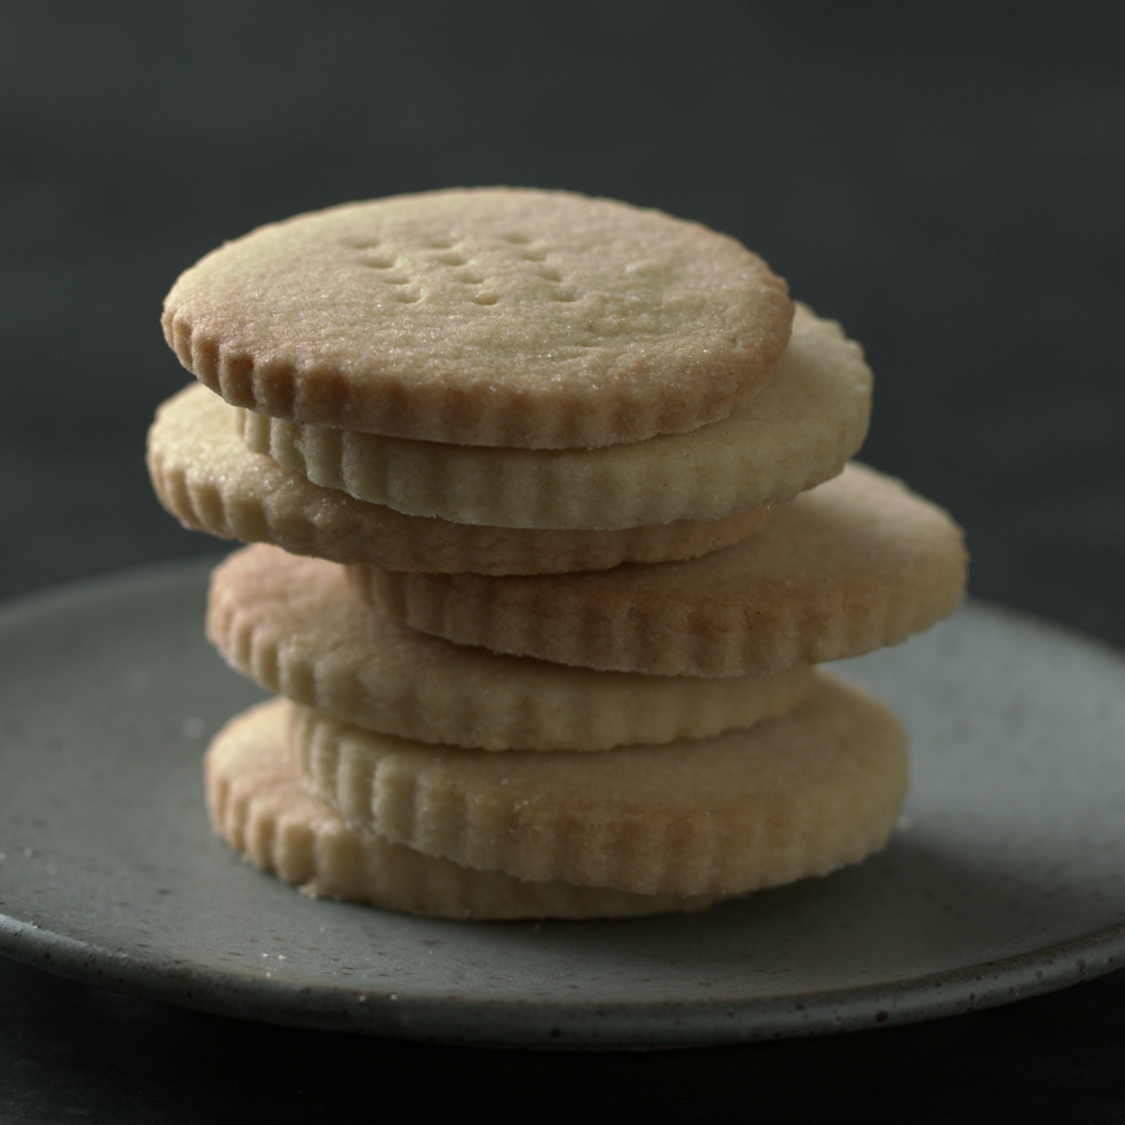 Shortbread Biscuits - The Great British Bake Off | The Great British ...